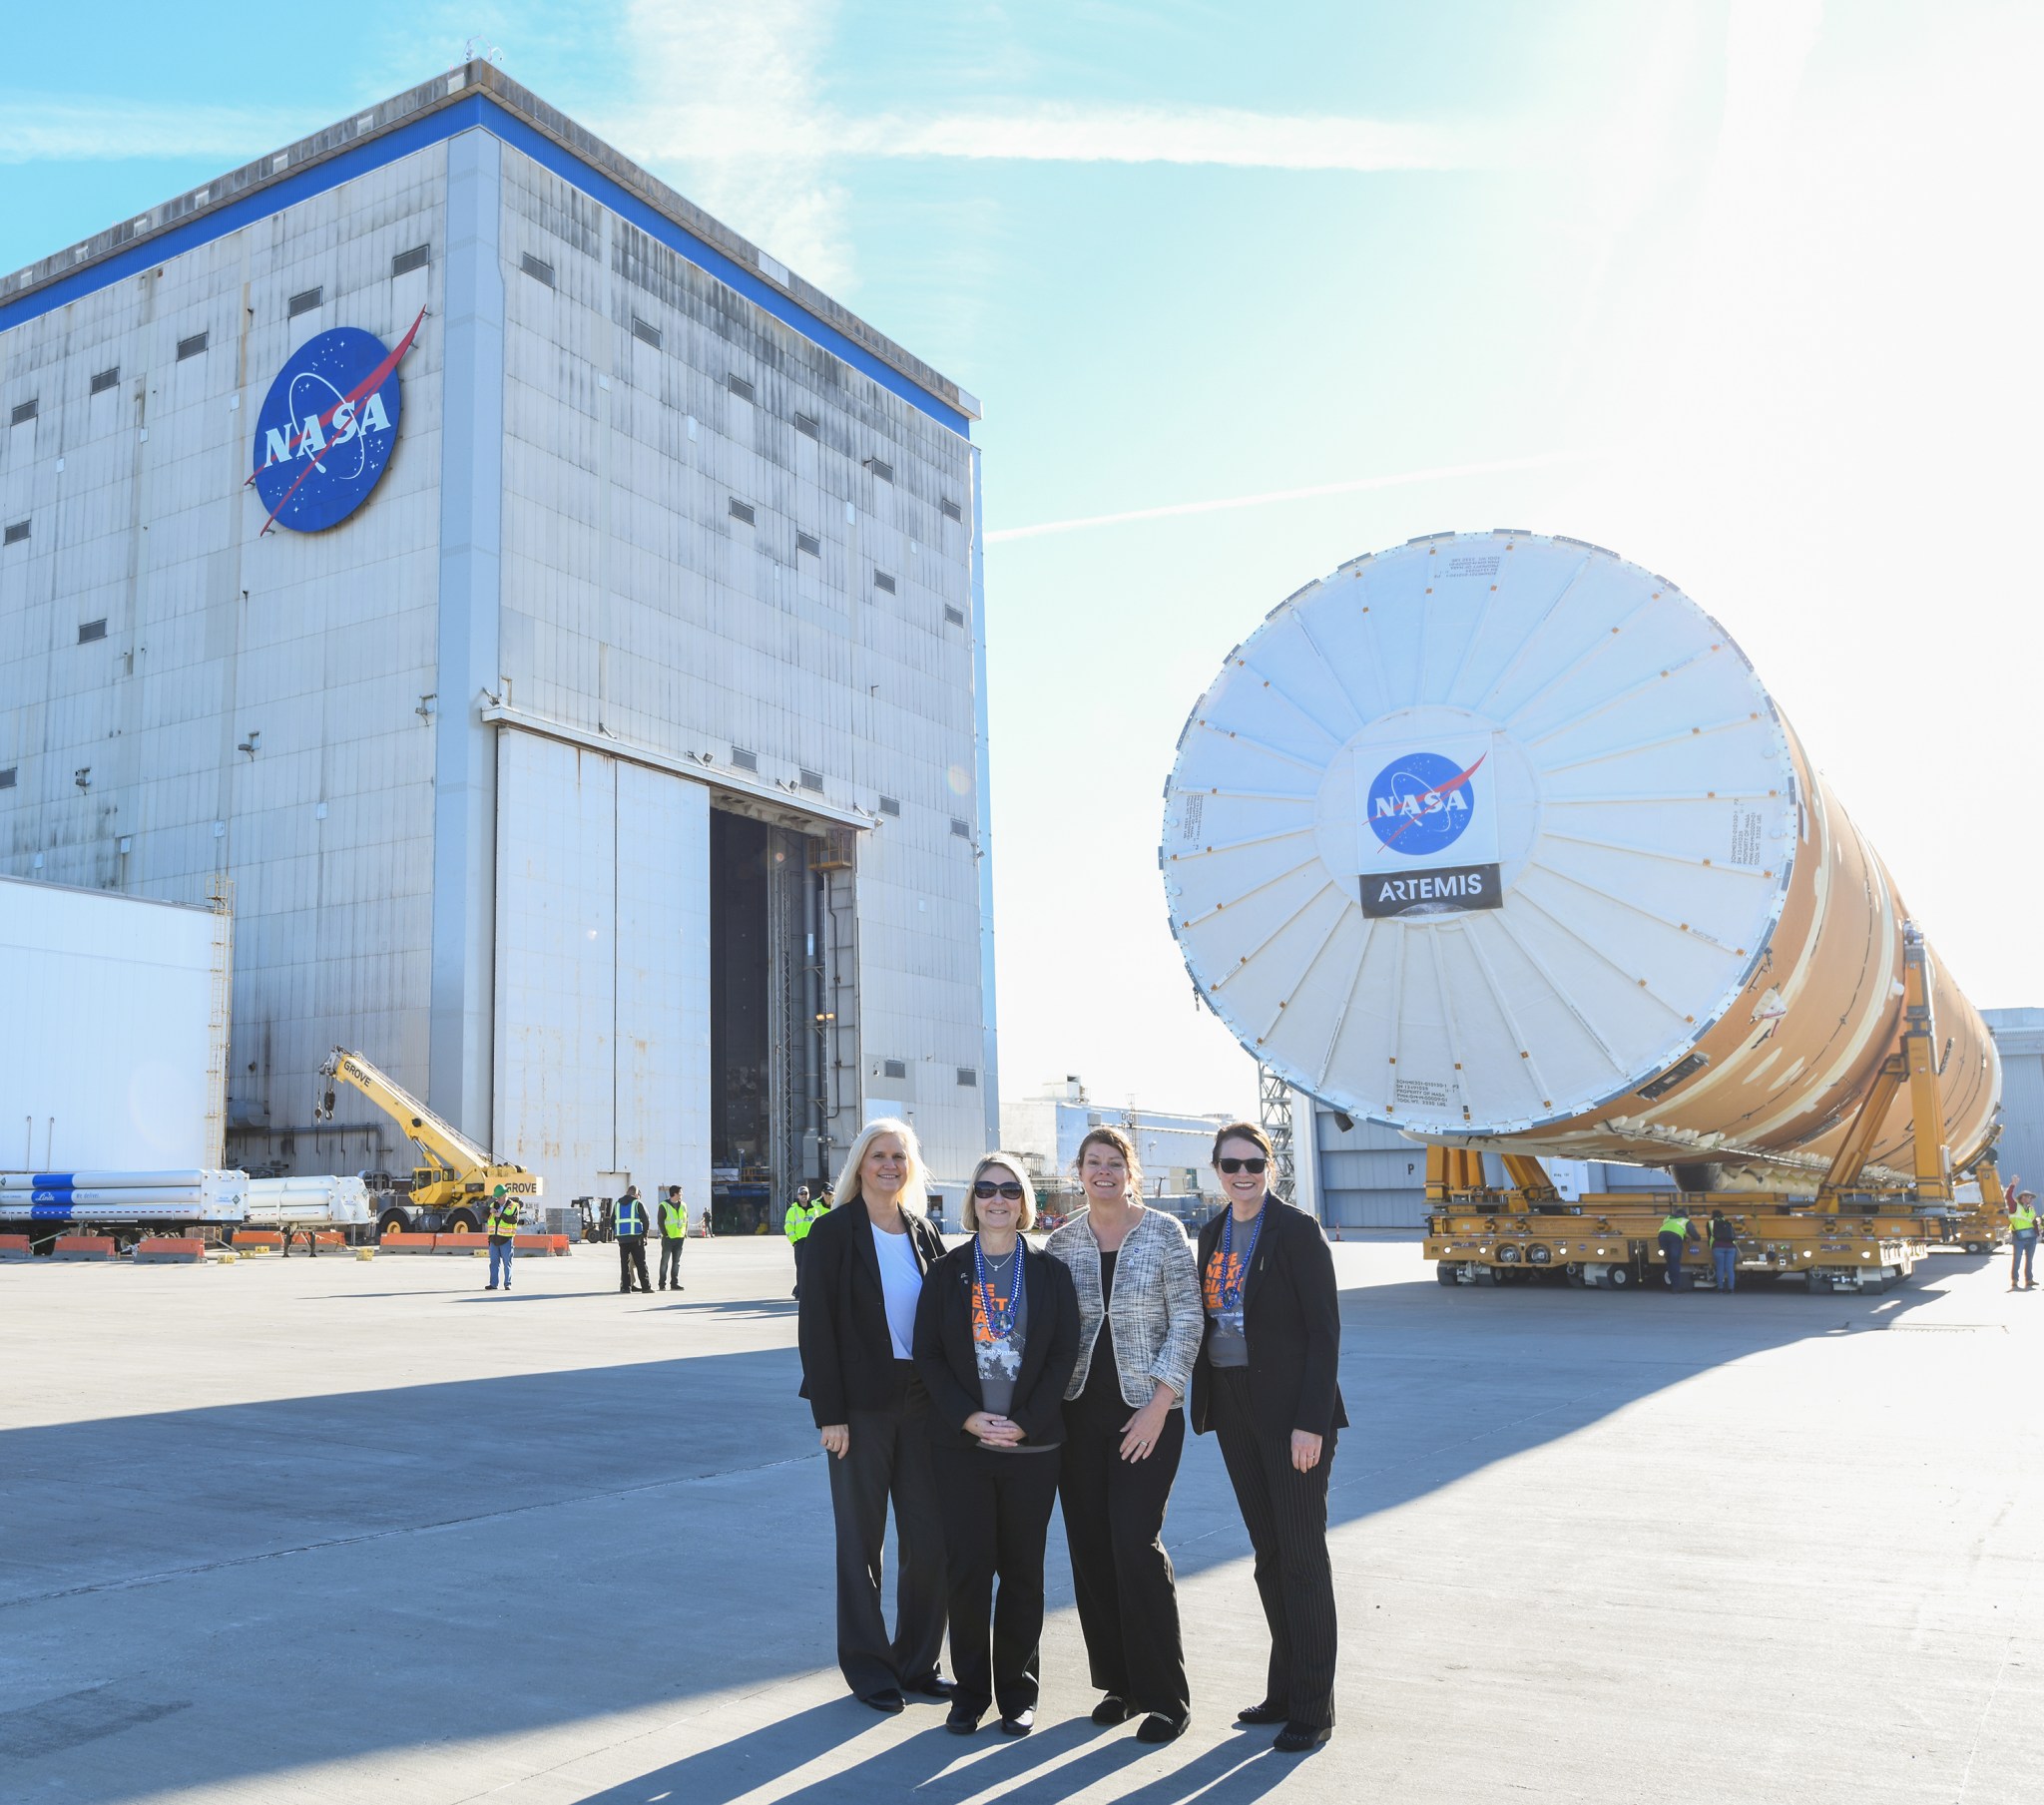 The four women in charge of the effort to build and test the 212-foot-tall rocket stage